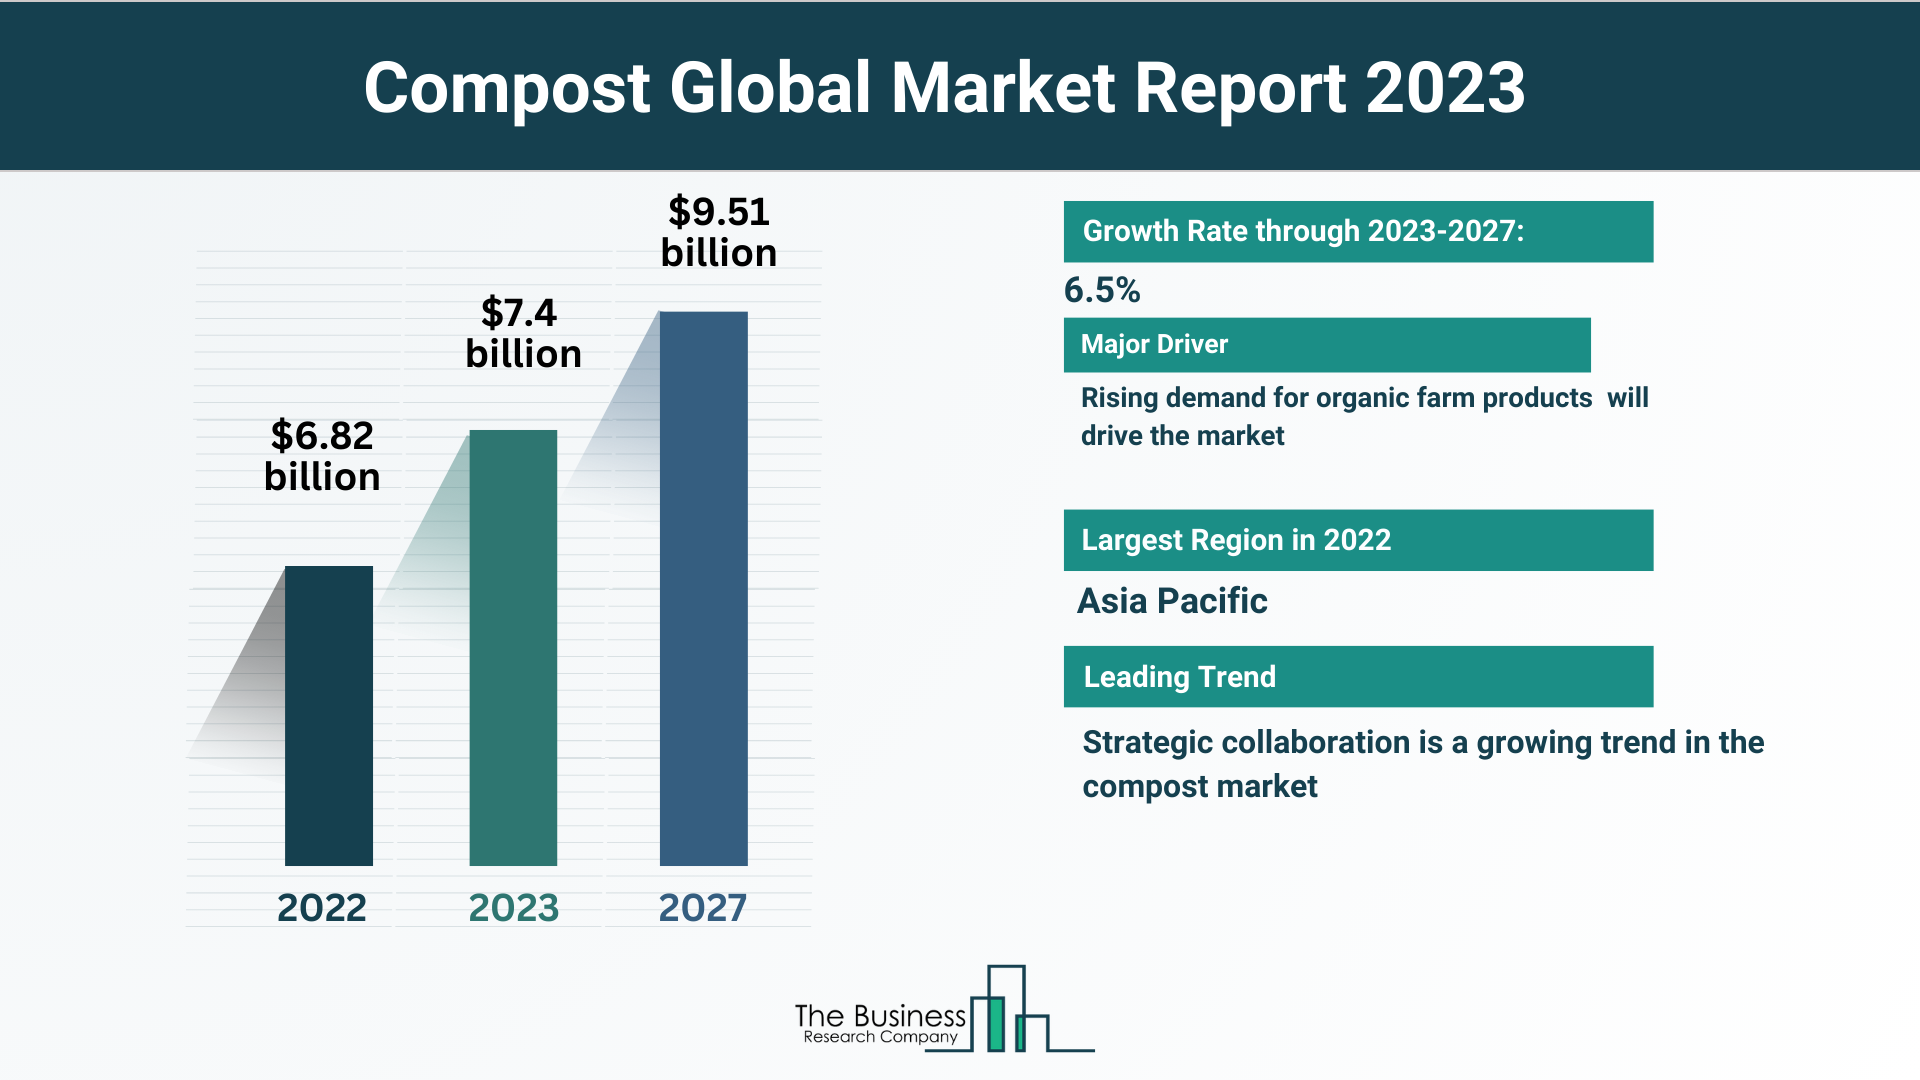 Global Compost Market Analysis: Size, Drivers, Trends, Opportunities And Strategies